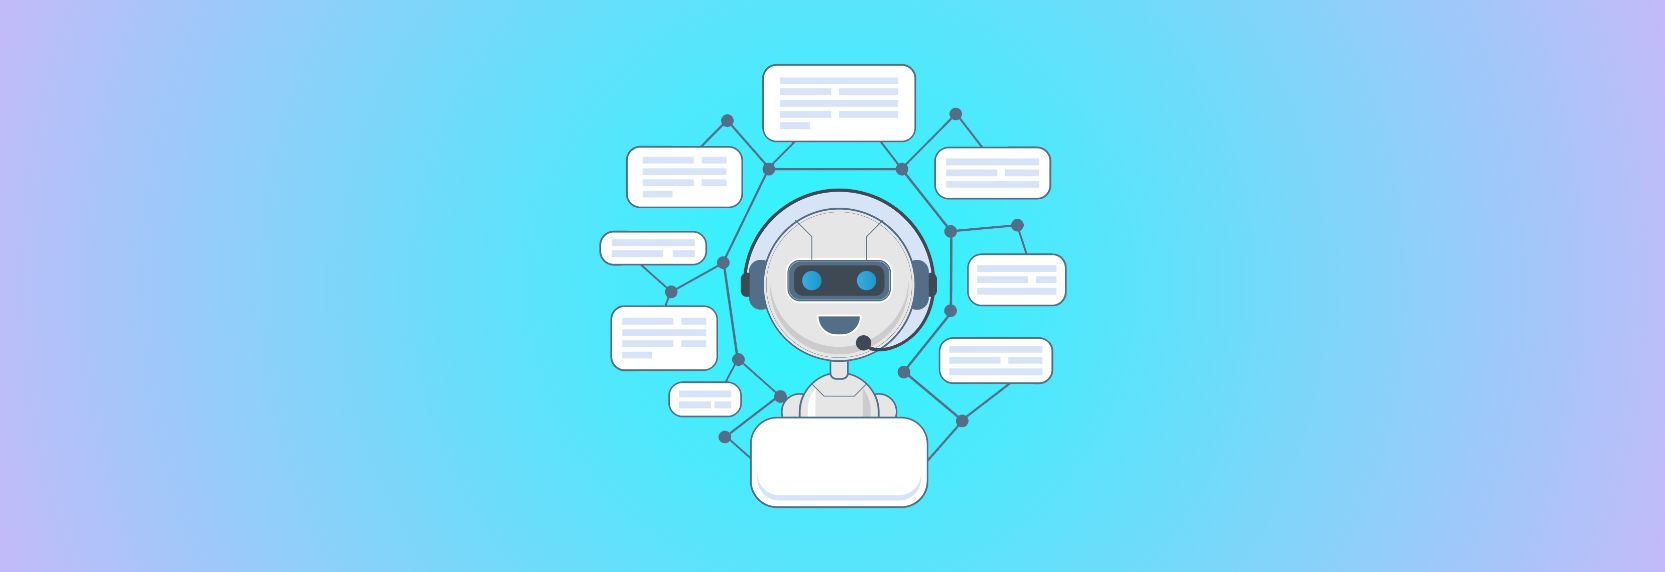 Benefits of using chatbots in messengers